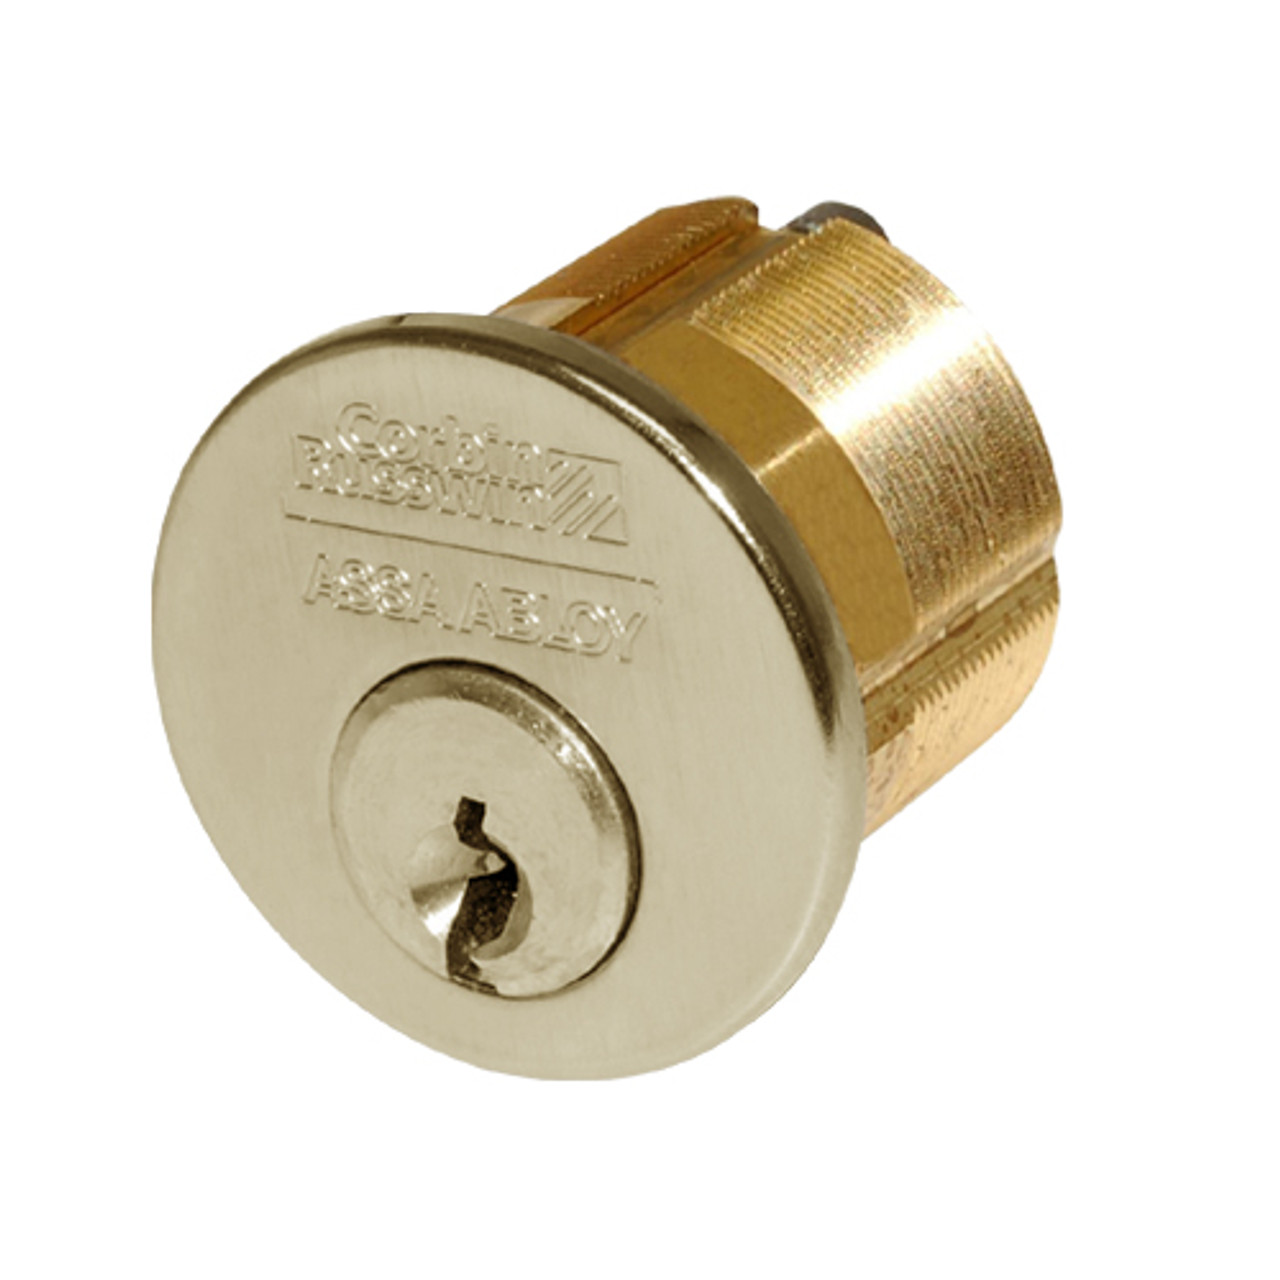 CR1000-138-A06-6-59A1-606 Corbin Conventional Mortise Cylinder for Mortise Lock and DL3000 Deadlocks with Schlage L9000 Cam in Satin Brass Finish